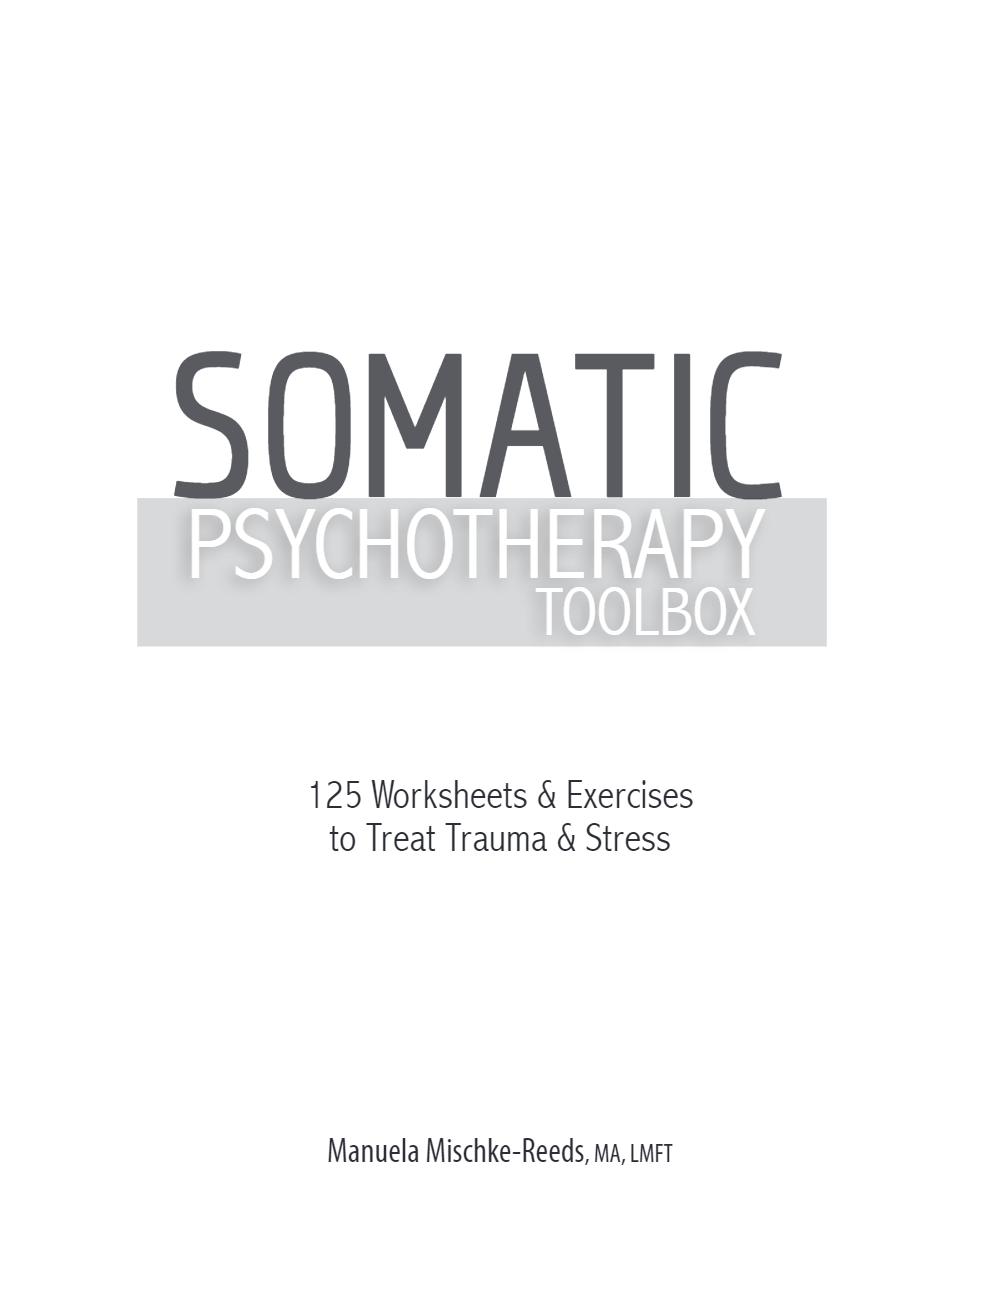 Somatic Psychotherapy Toolbox: 125 Worksheets and Exercises to Treat Trauma & Stress